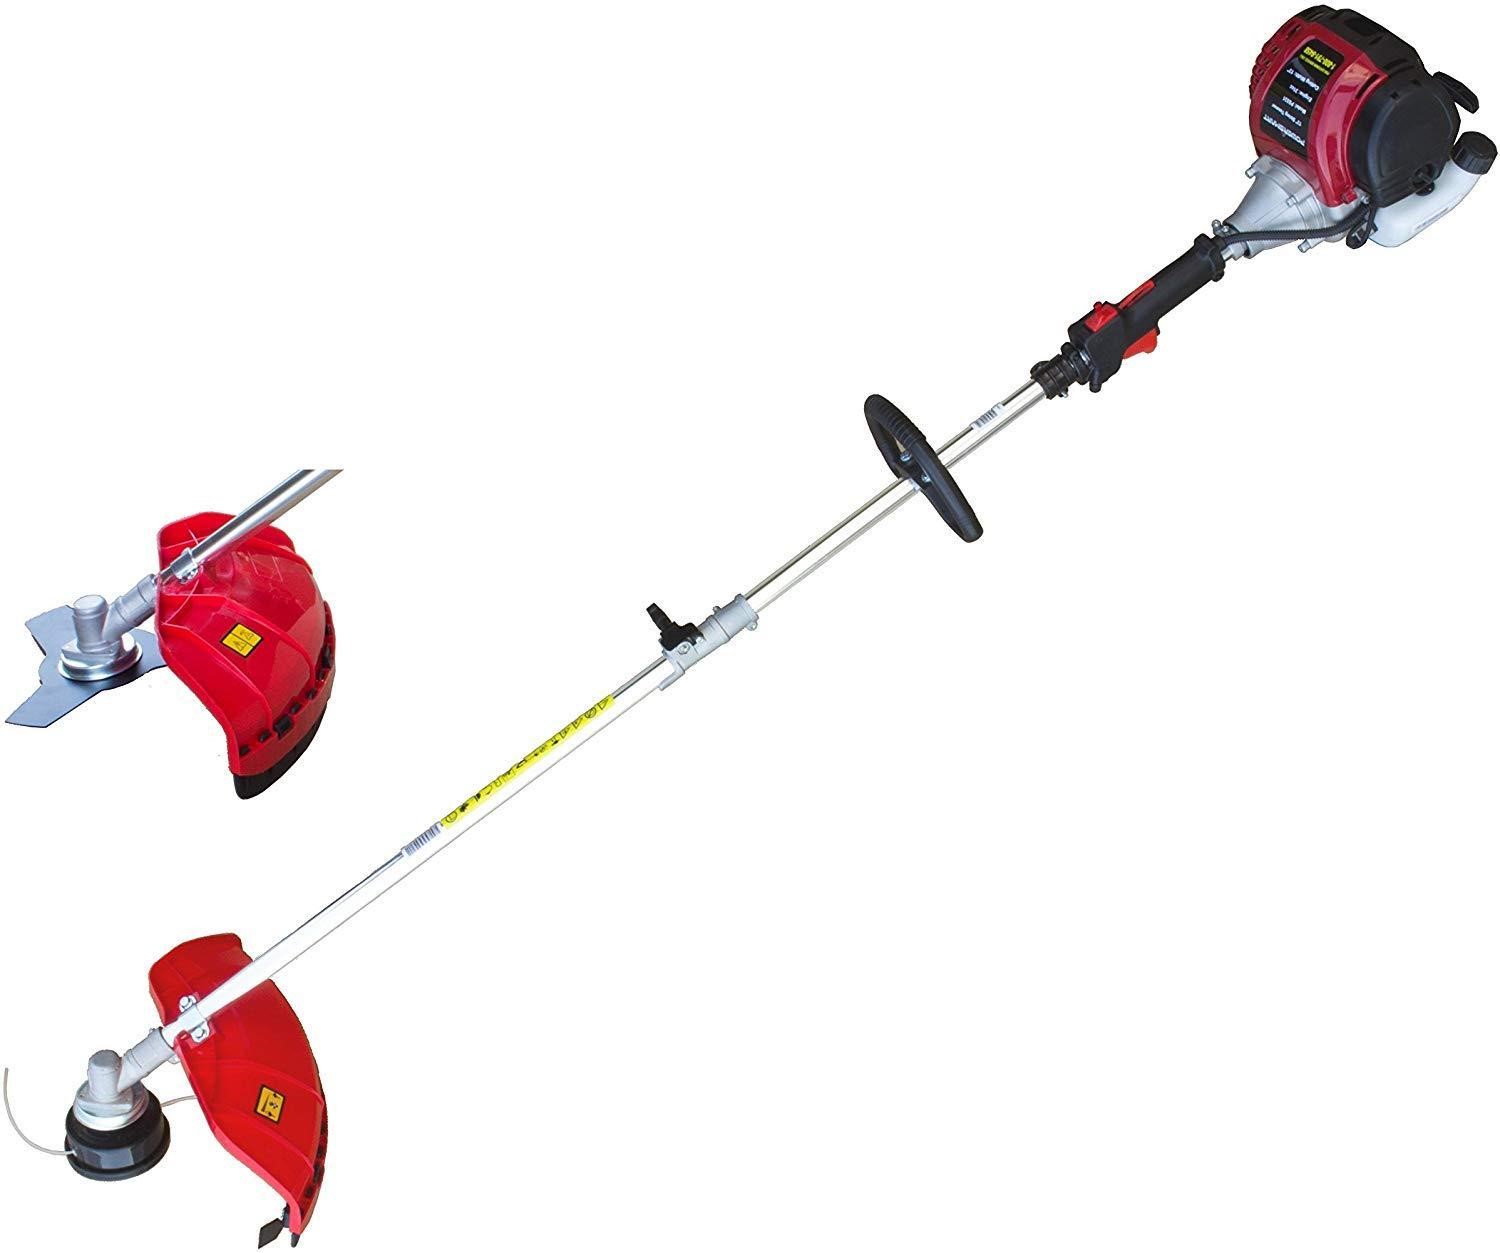 PowerSmart PS4531 Gas String Strimmer and Brush Cutter